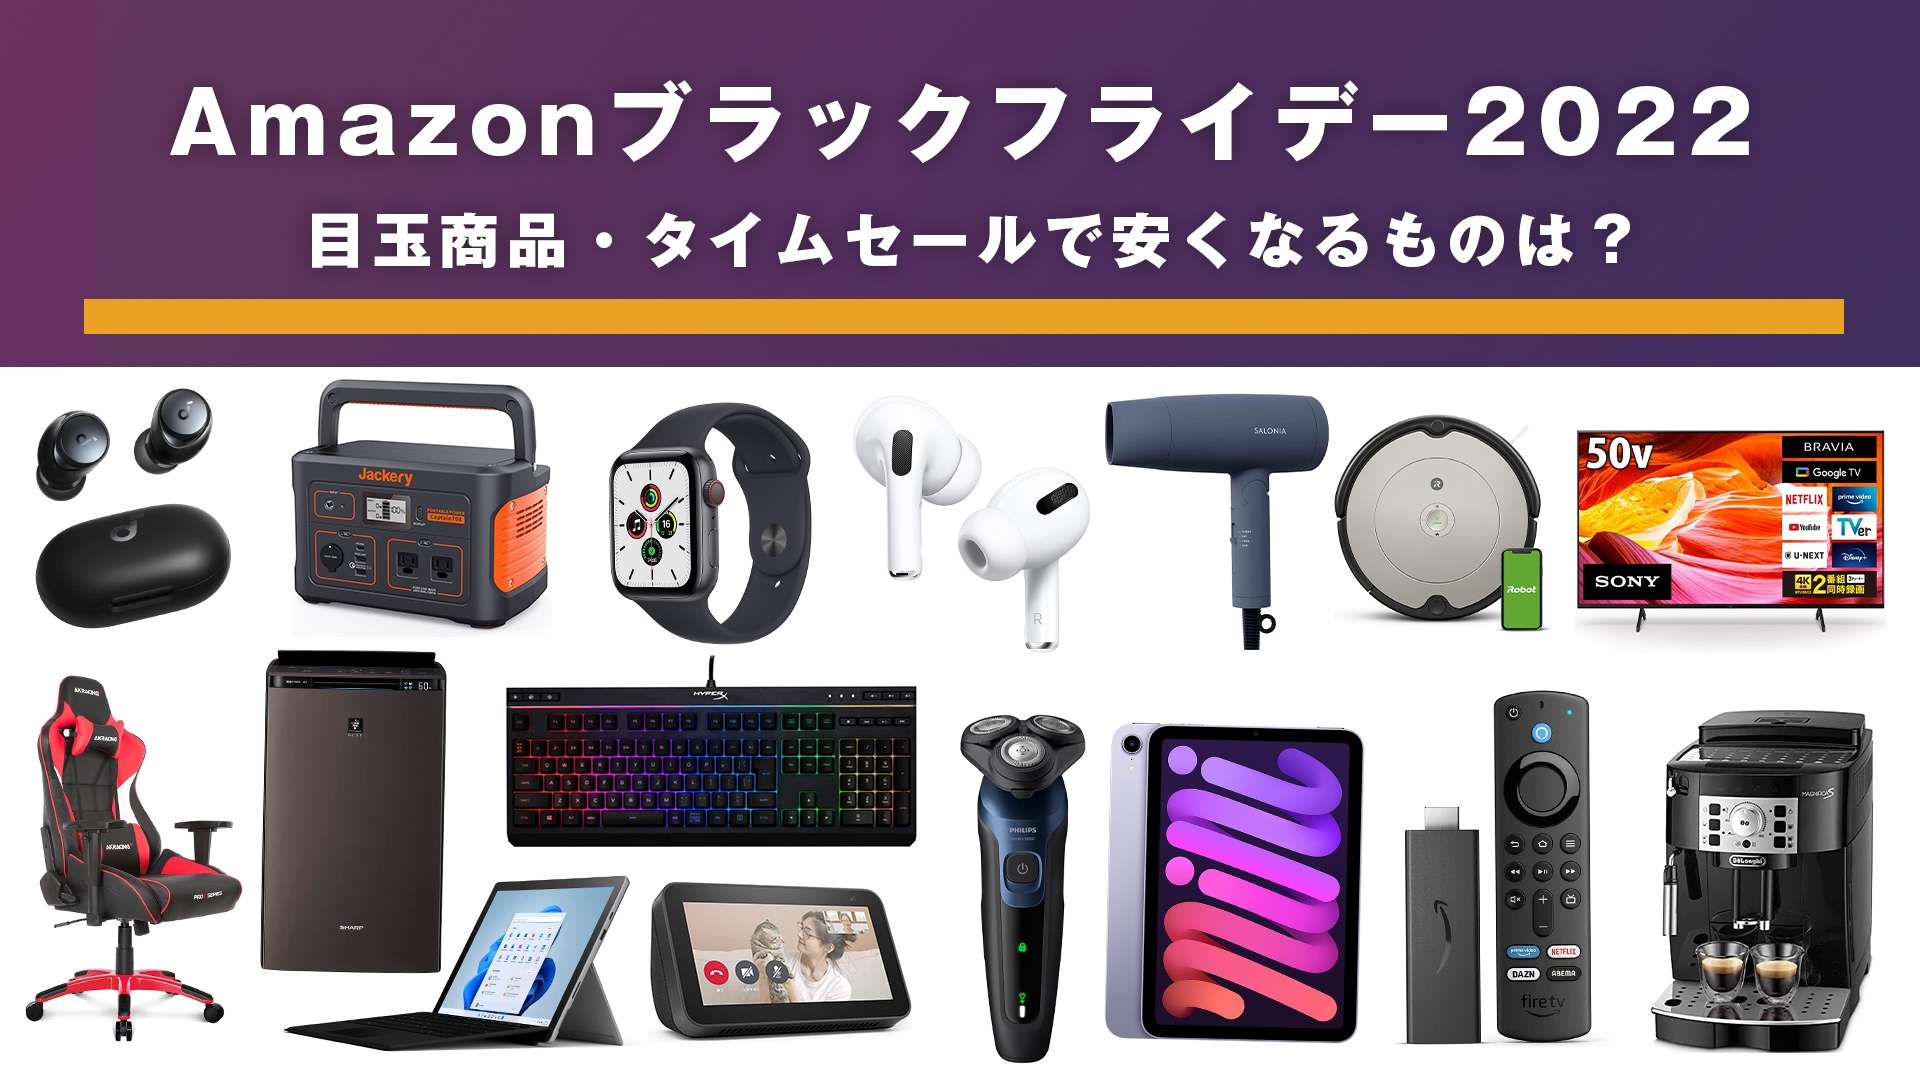 Amazon Black Friday 2022 Featured Products